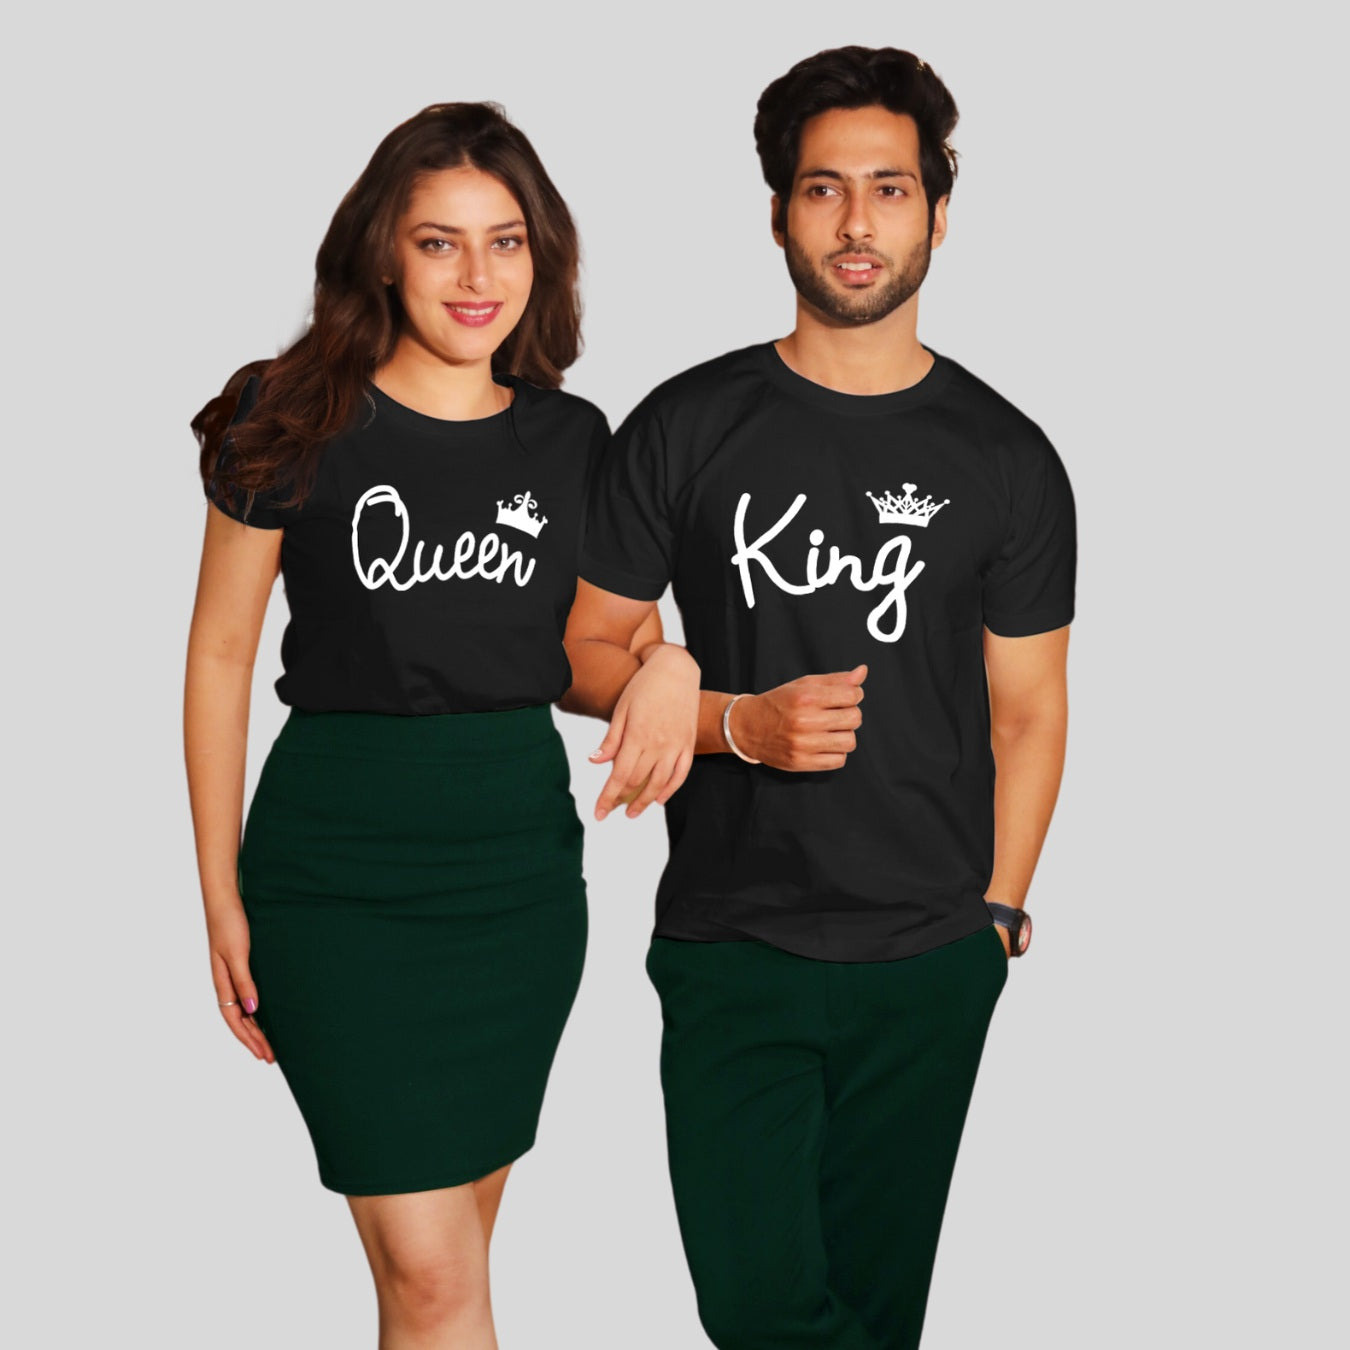 Couple T Shirt in Black Colour - King Queen Variant